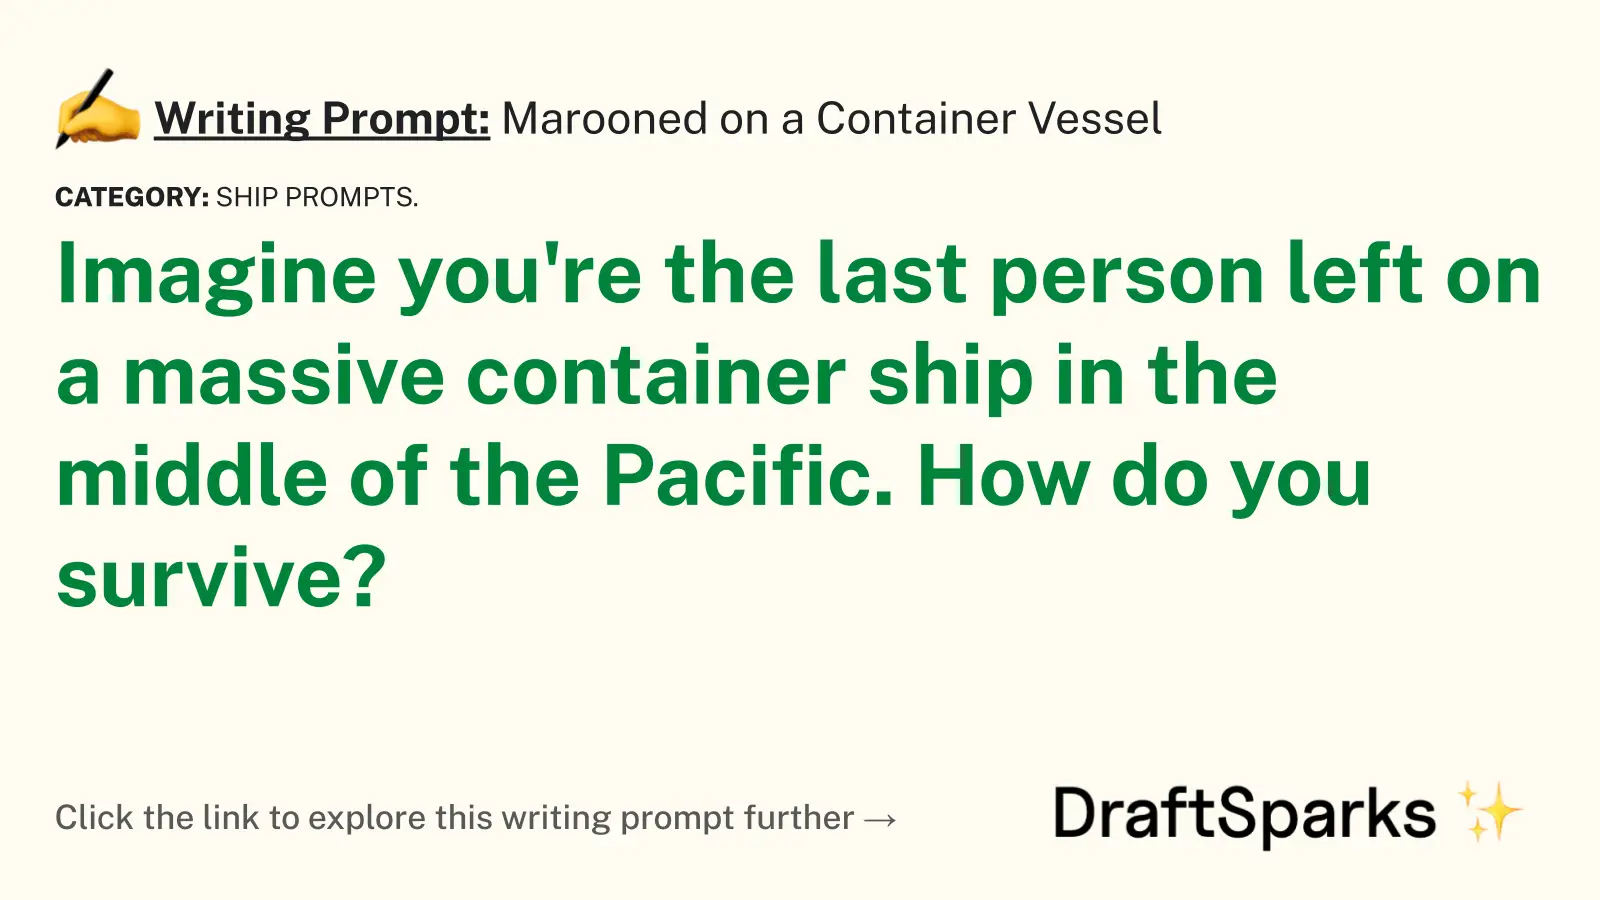 Marooned on a Container Vessel